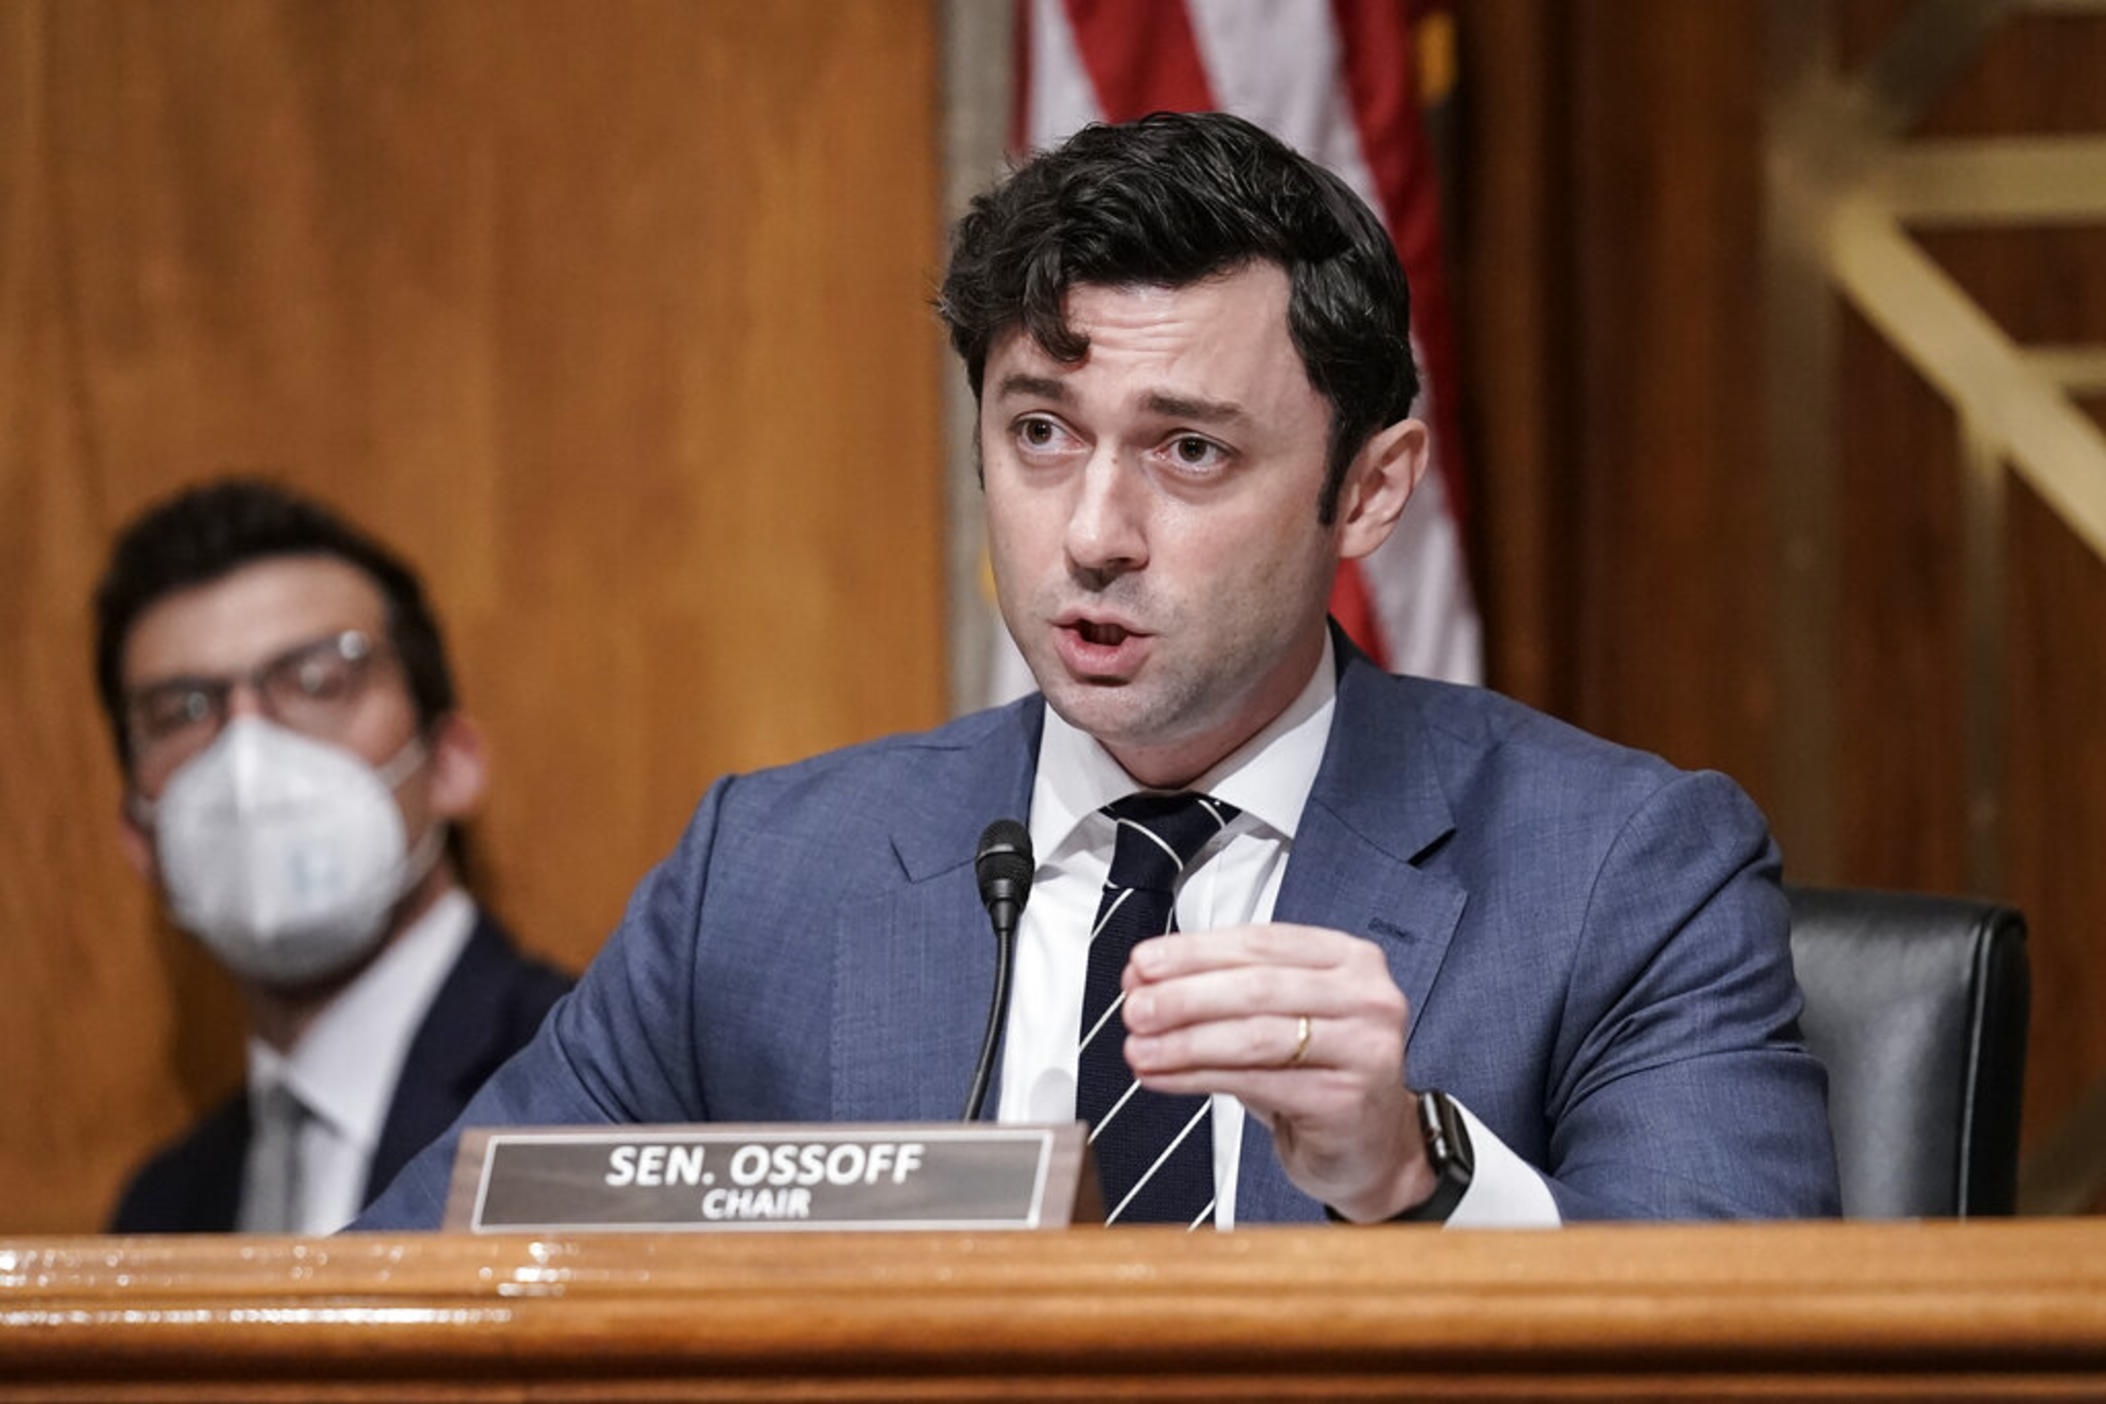 Chairman Jon Ossoff, D-Ga., questions Michael Carvajal, the outgoing director of the Federal Bureau of Prisons, as the Senate Permanent Subcommittee On Investigations holds a hearing on charges of corruption and misconduct at the U.S. Penitentiary in Atlanta, at the Capitol in Washington, July 26, 2022.